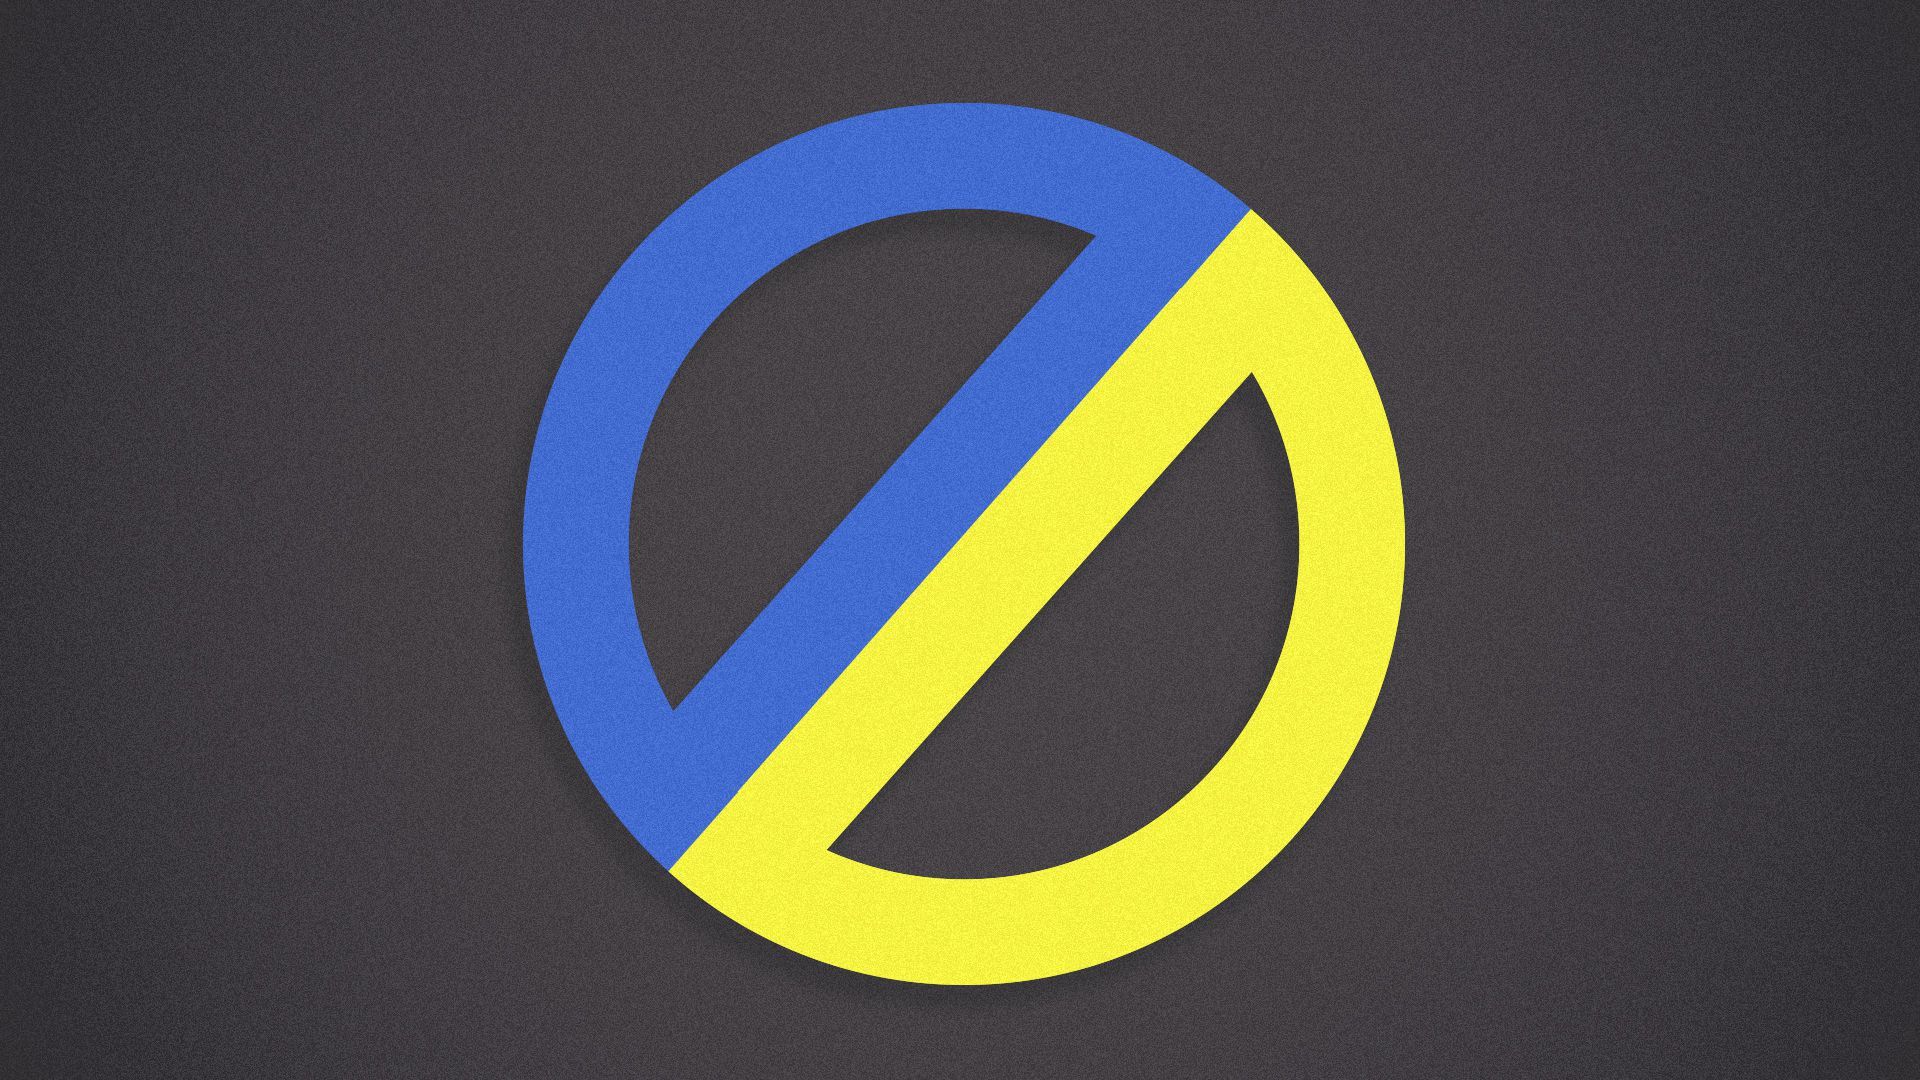 Illustration of the "no" symbol with the colors of the Ukrainian flag.